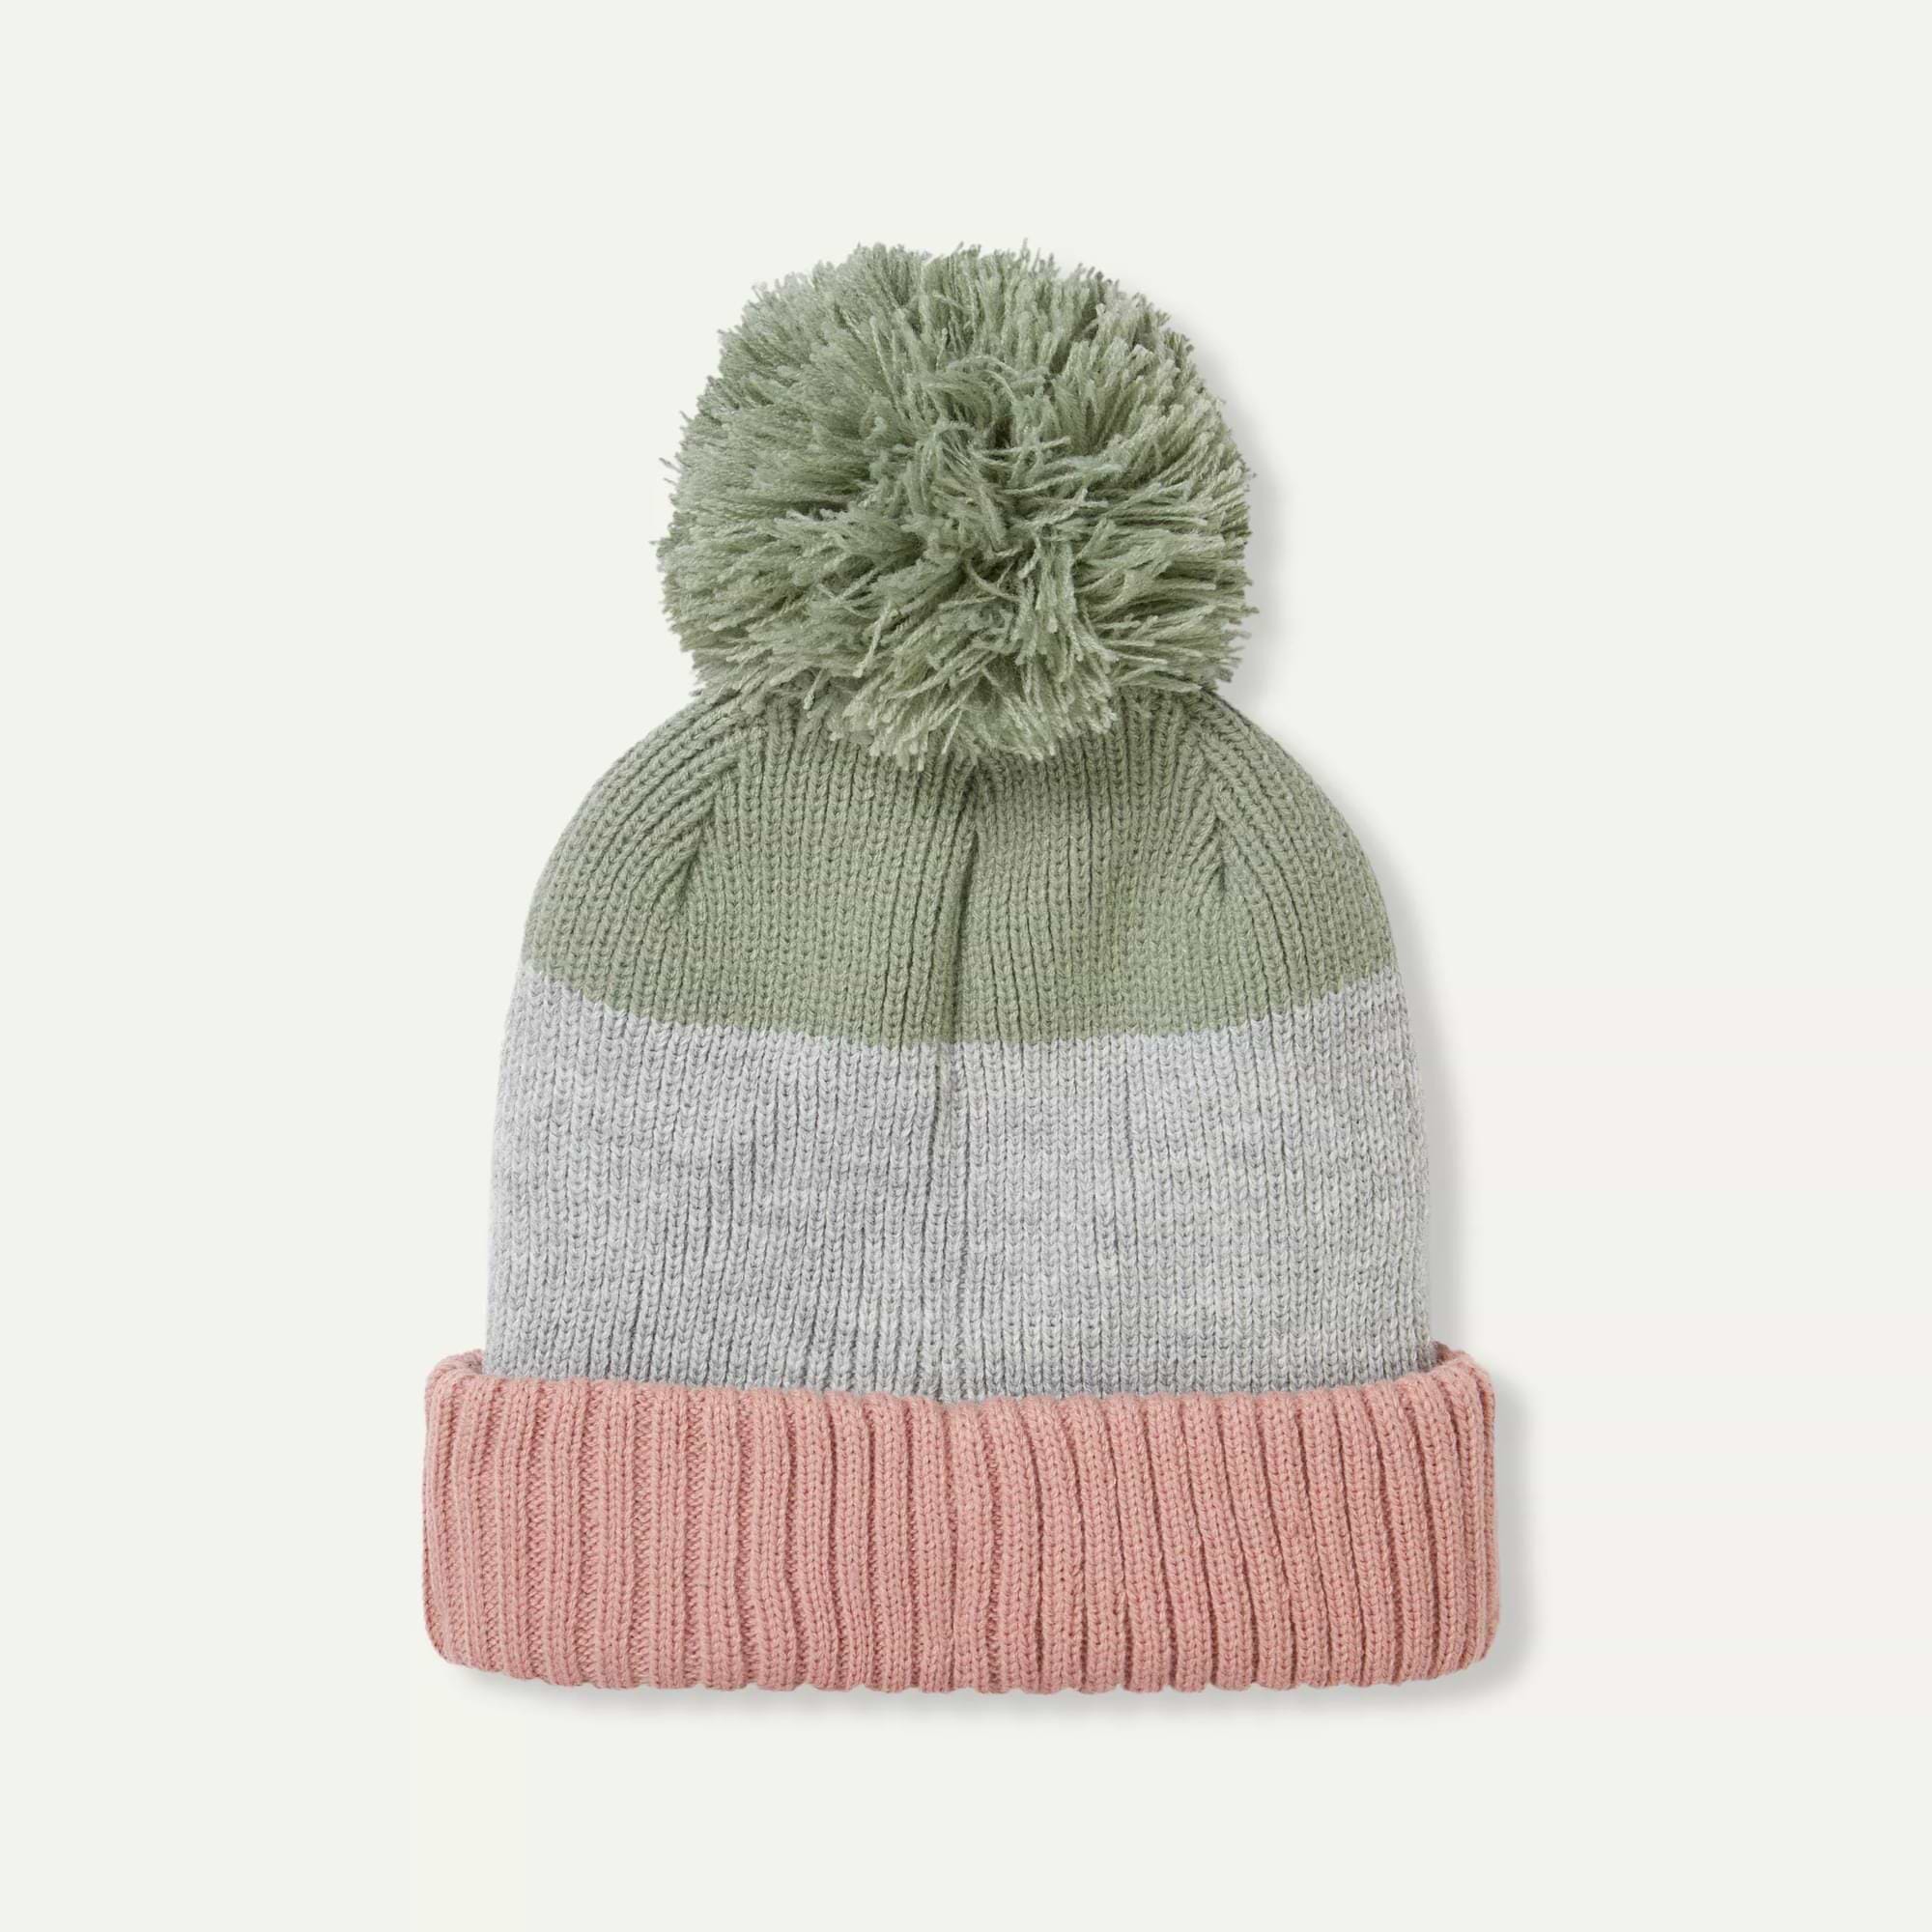 Flitcham - Waterproof Fleece Lined Cold Weather Striped Bobble Hat